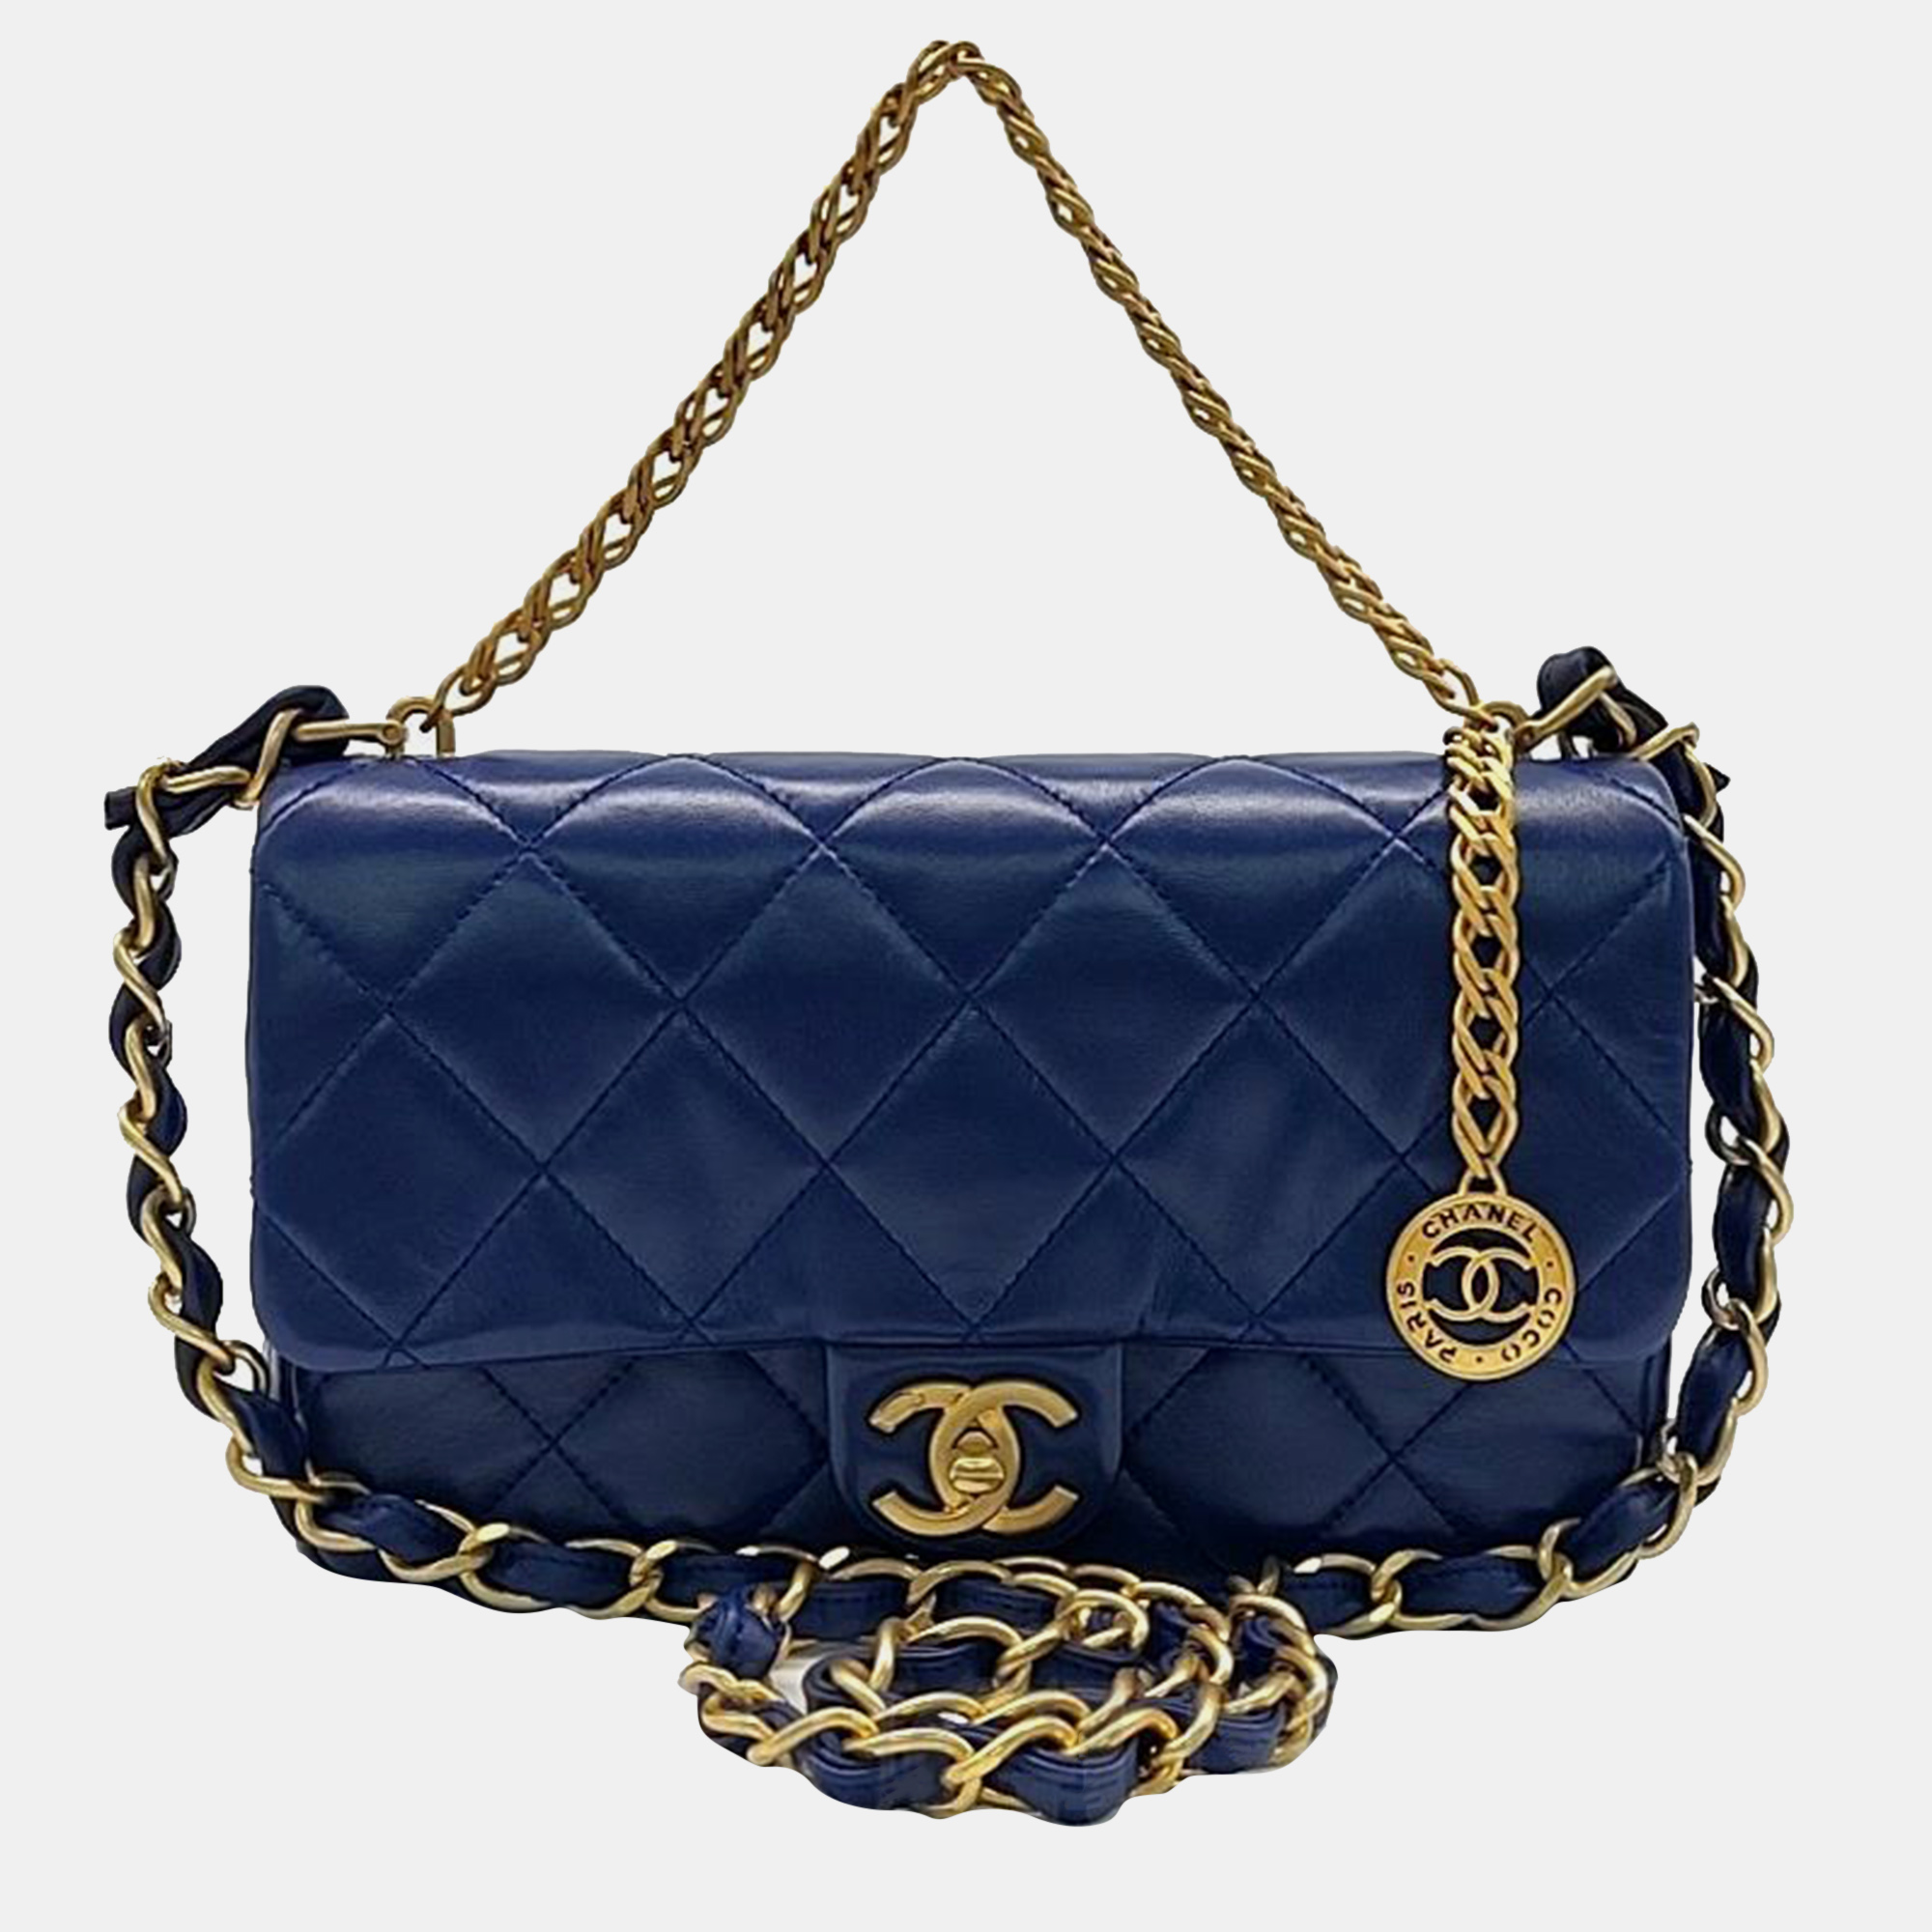 Chanel navy blue leather coin chain flap bag